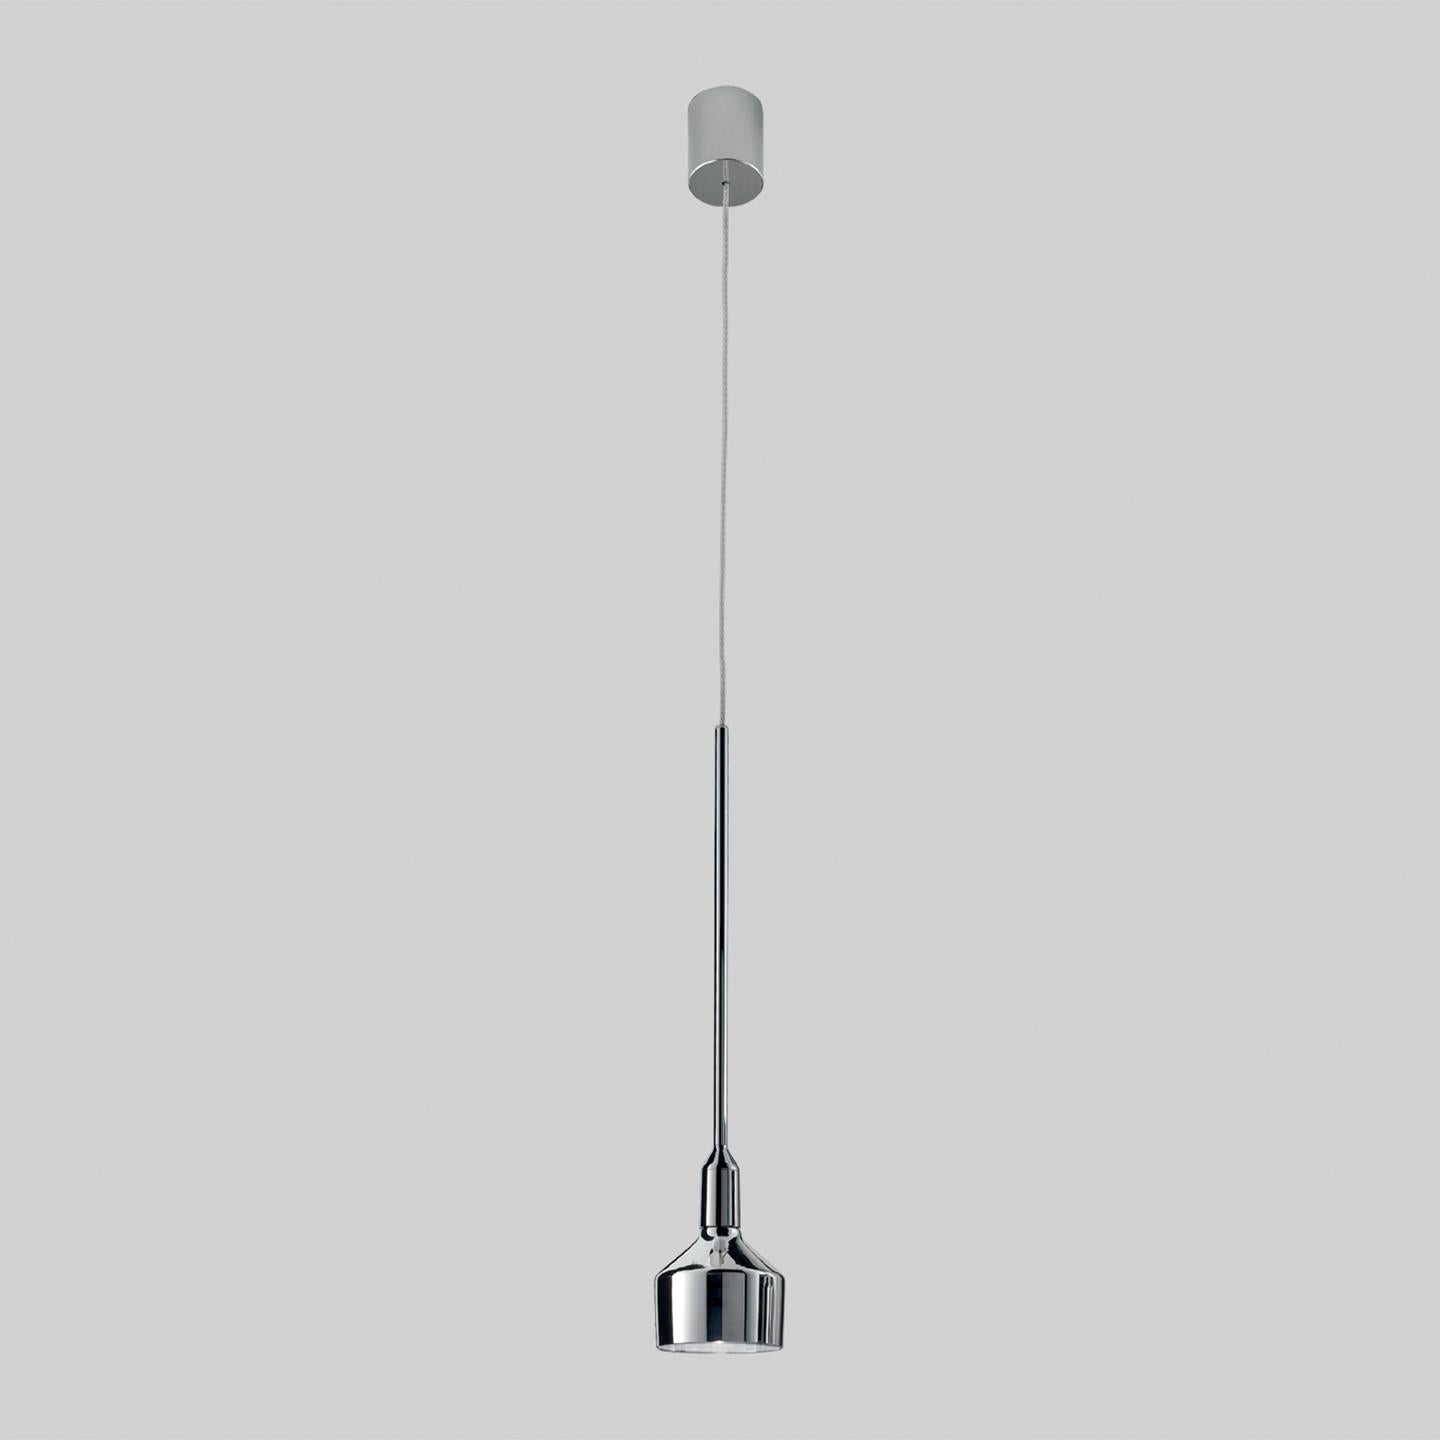 Arik Levy designed the Beamer Pendant in 2013 to be a clever, multivariable pendant system. While the Beamer Pendant looks great as a standalone, the versatile pendant can be customized into three and five multipoint systems and comes in two sizes.